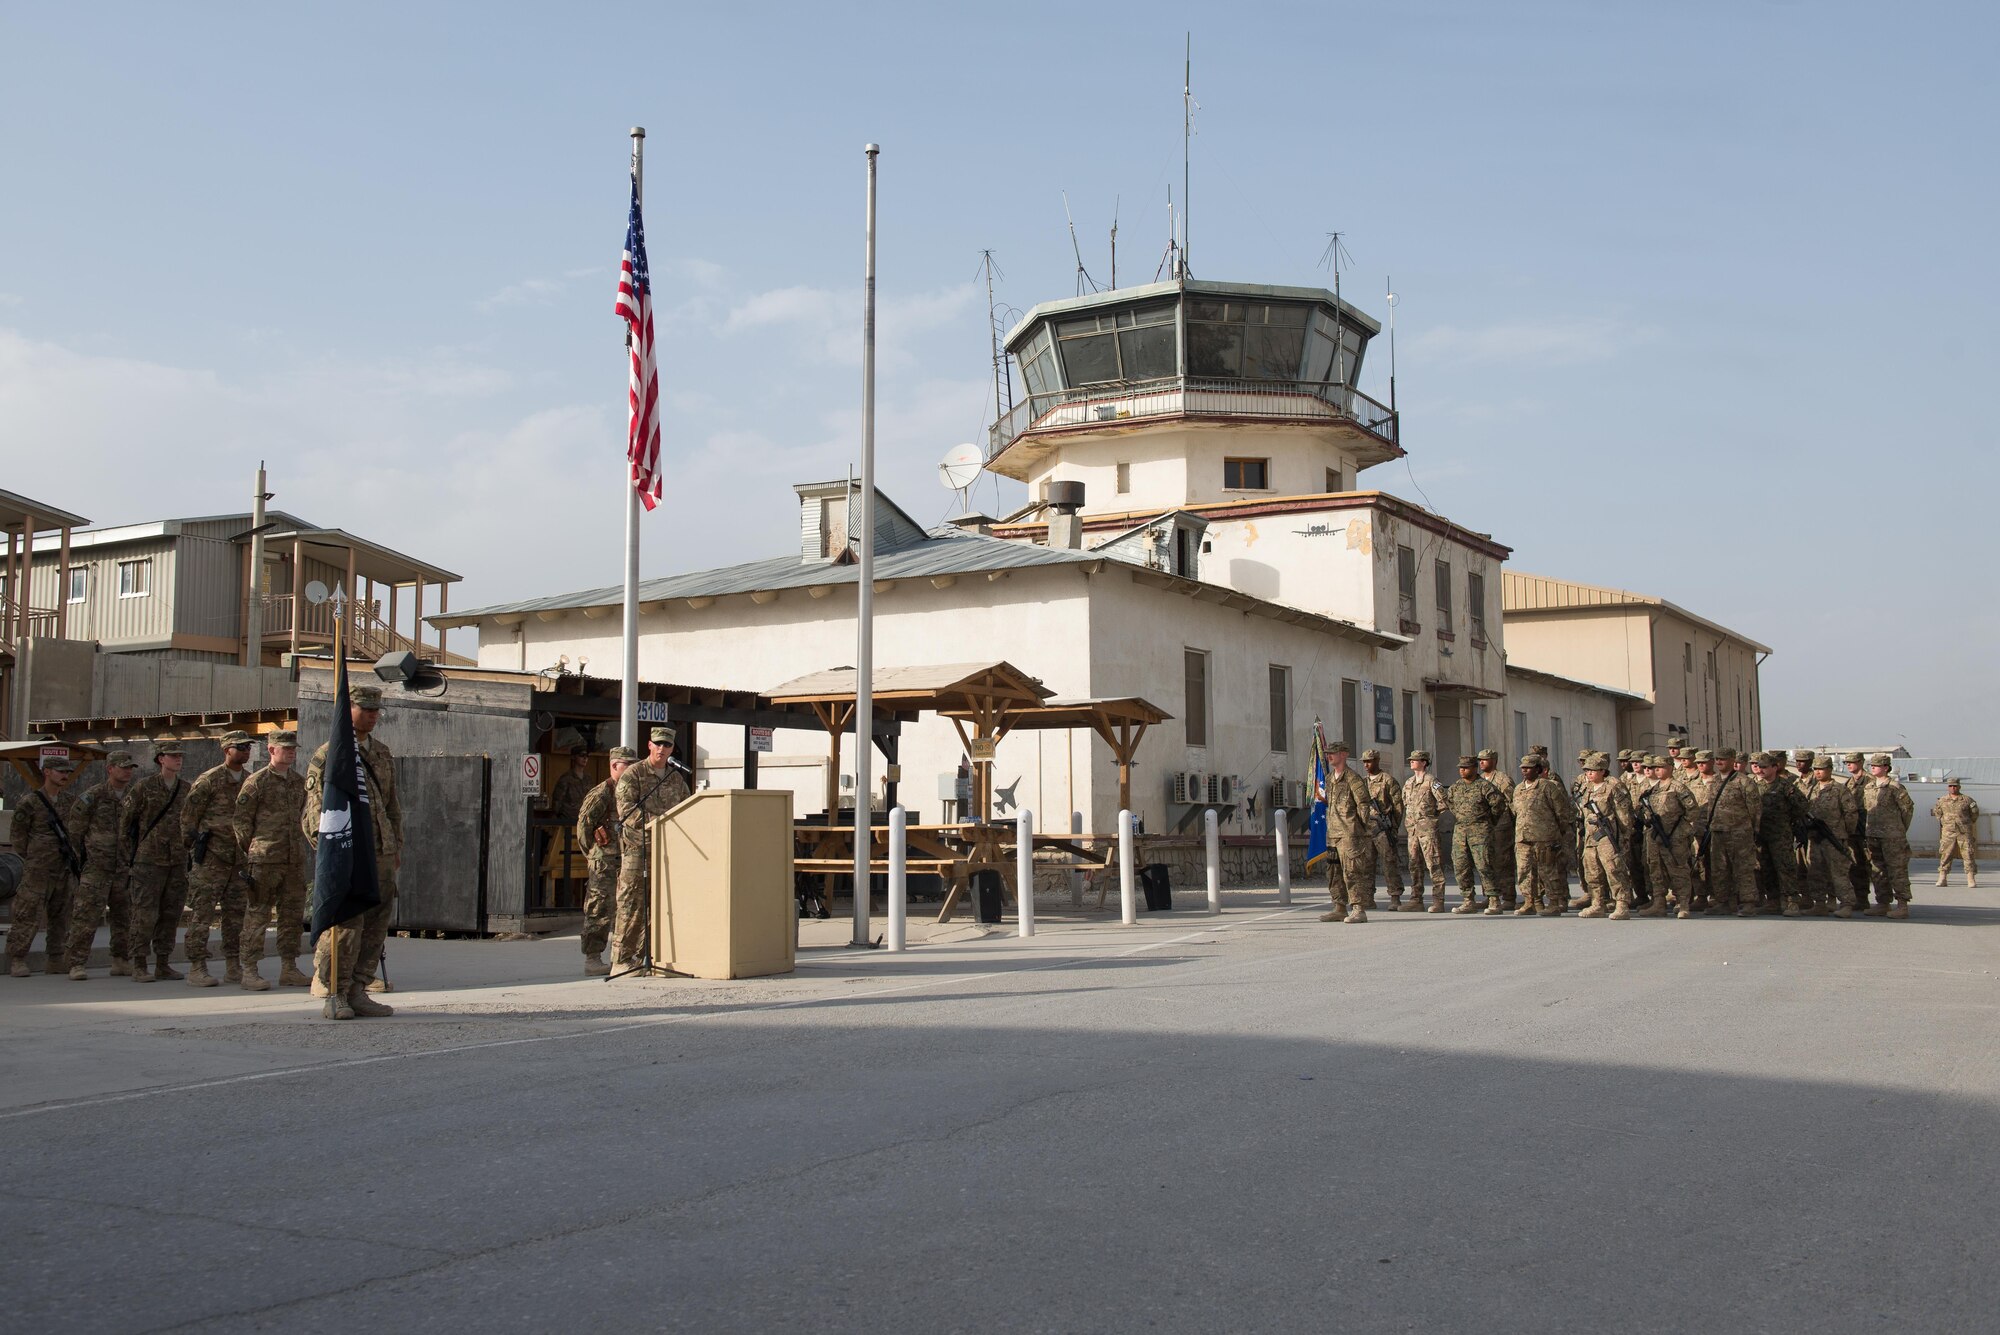 U.S. Air Force Chief Master Sgt. Matthew Grengs, 455th Air Expeditionary Wing command chief, gives a speech during the Prisoners Of War, Missing In Action Remembrance and Retreat Ceremony at Bagram Airfield, Afghanistan, Sept. 17, 2015. The ceremony was in honor of National POW/MIA Remembrance Day, which is observed annually in the United States on the third Friday of September. (U.S. Air Force photo by Tech. Sgt. Joseph Swafford/Released)